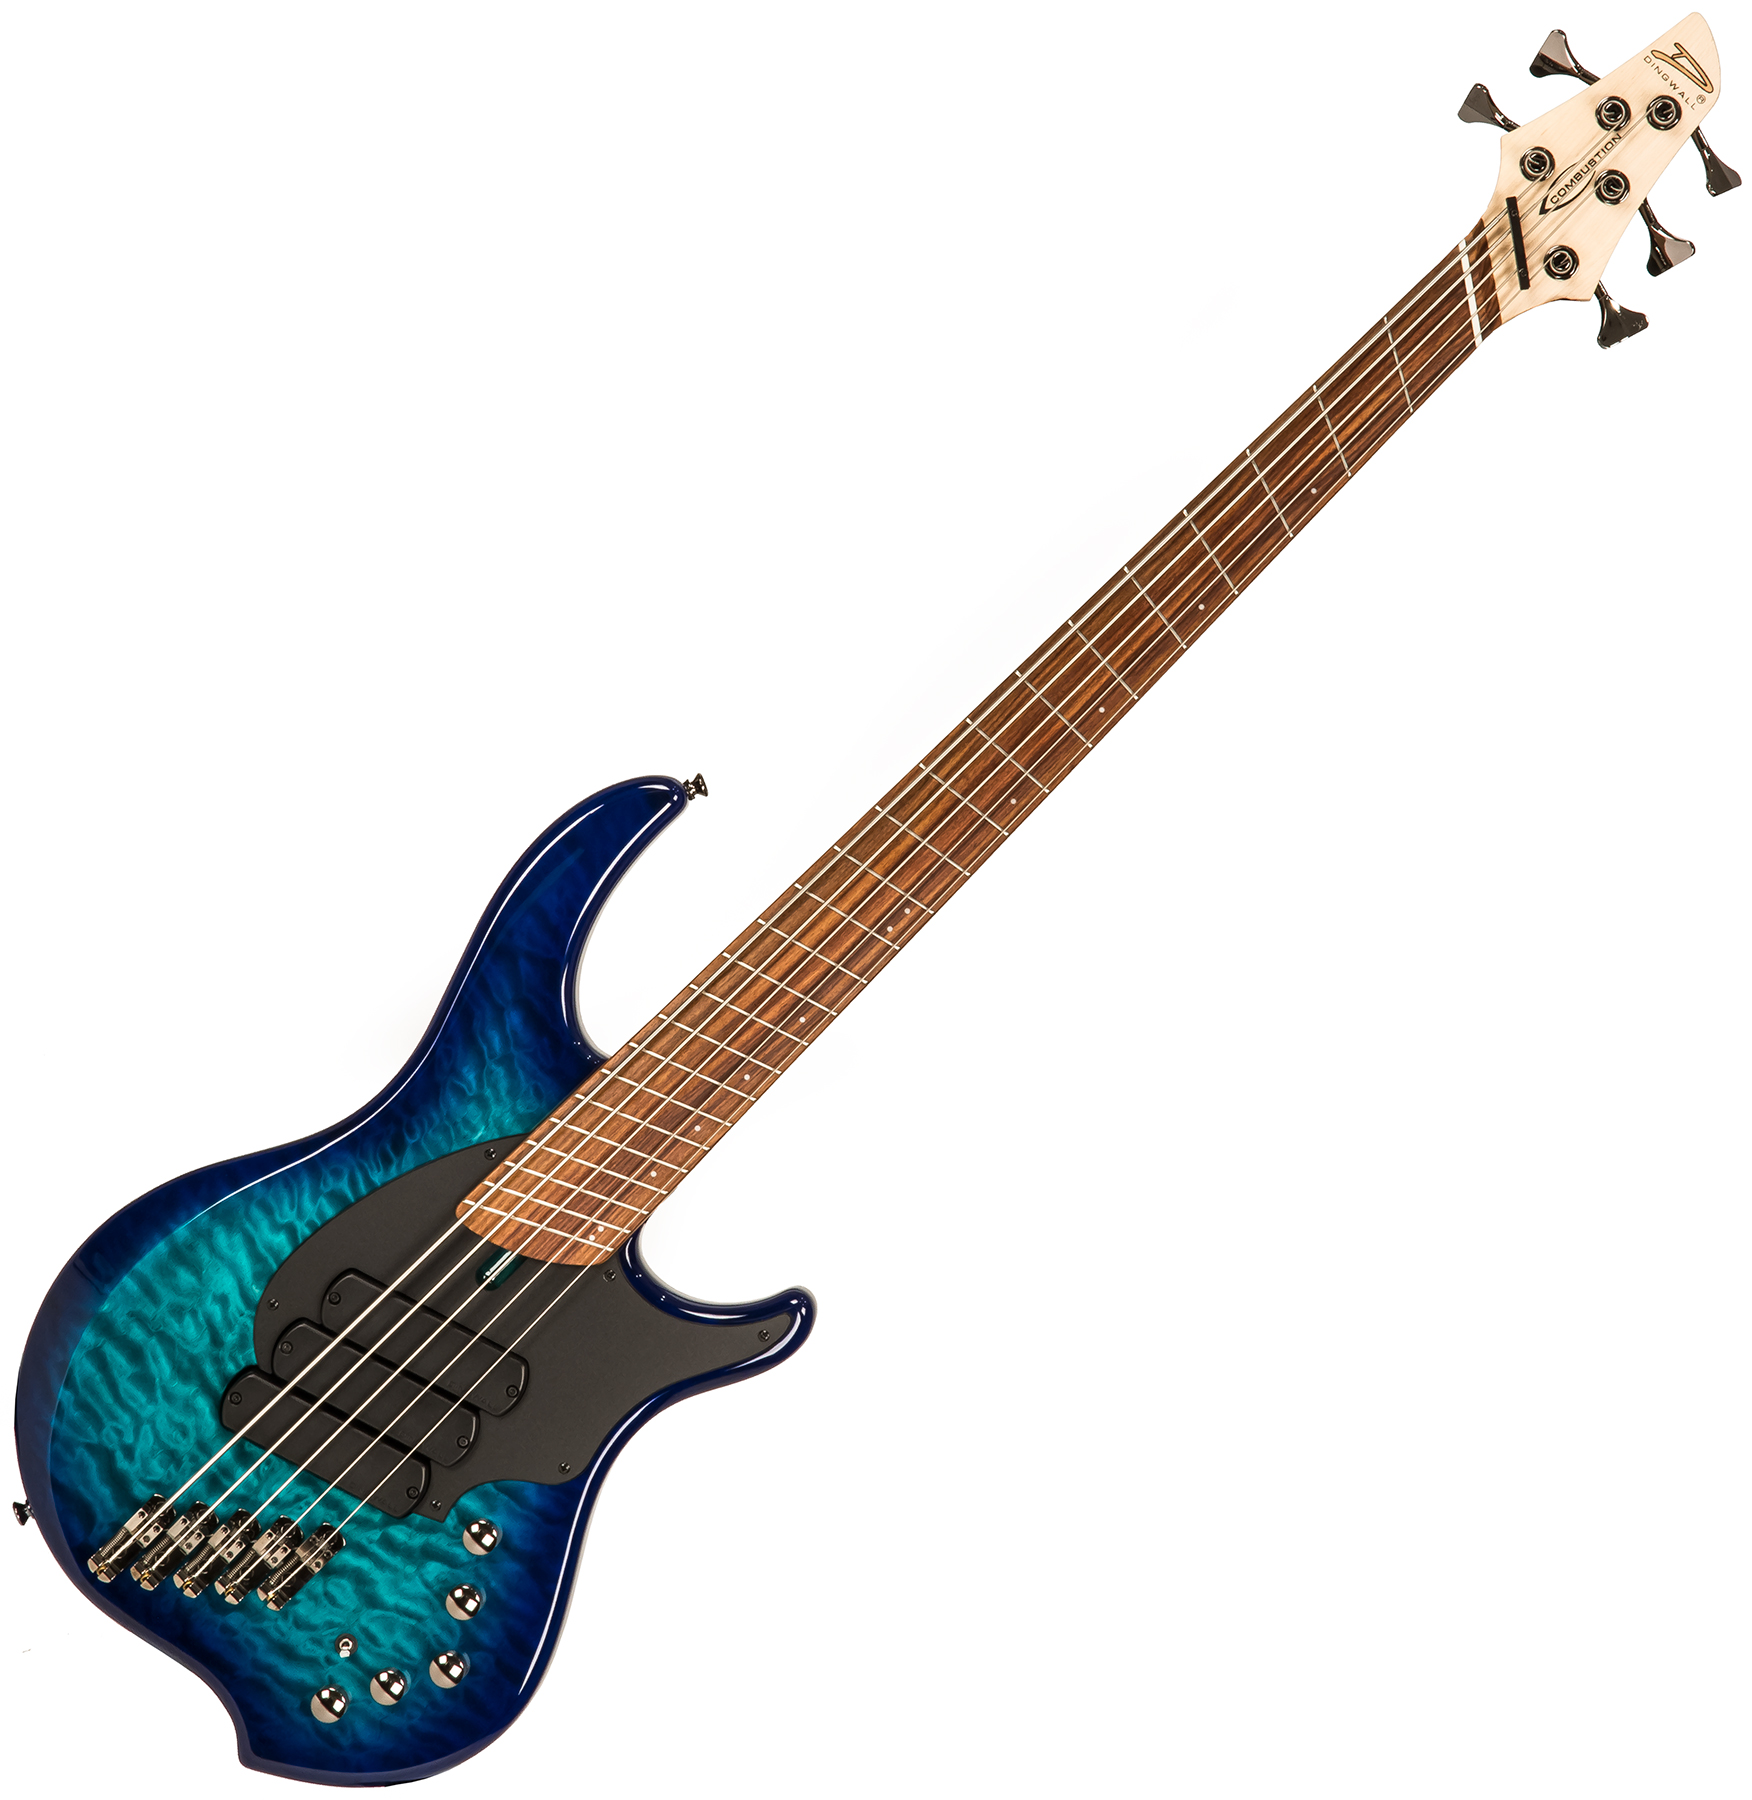 Dingwall Combustion 5 3-pickups Pf +housse - Whalepool Burst - Solid body electric bass - Variation 1